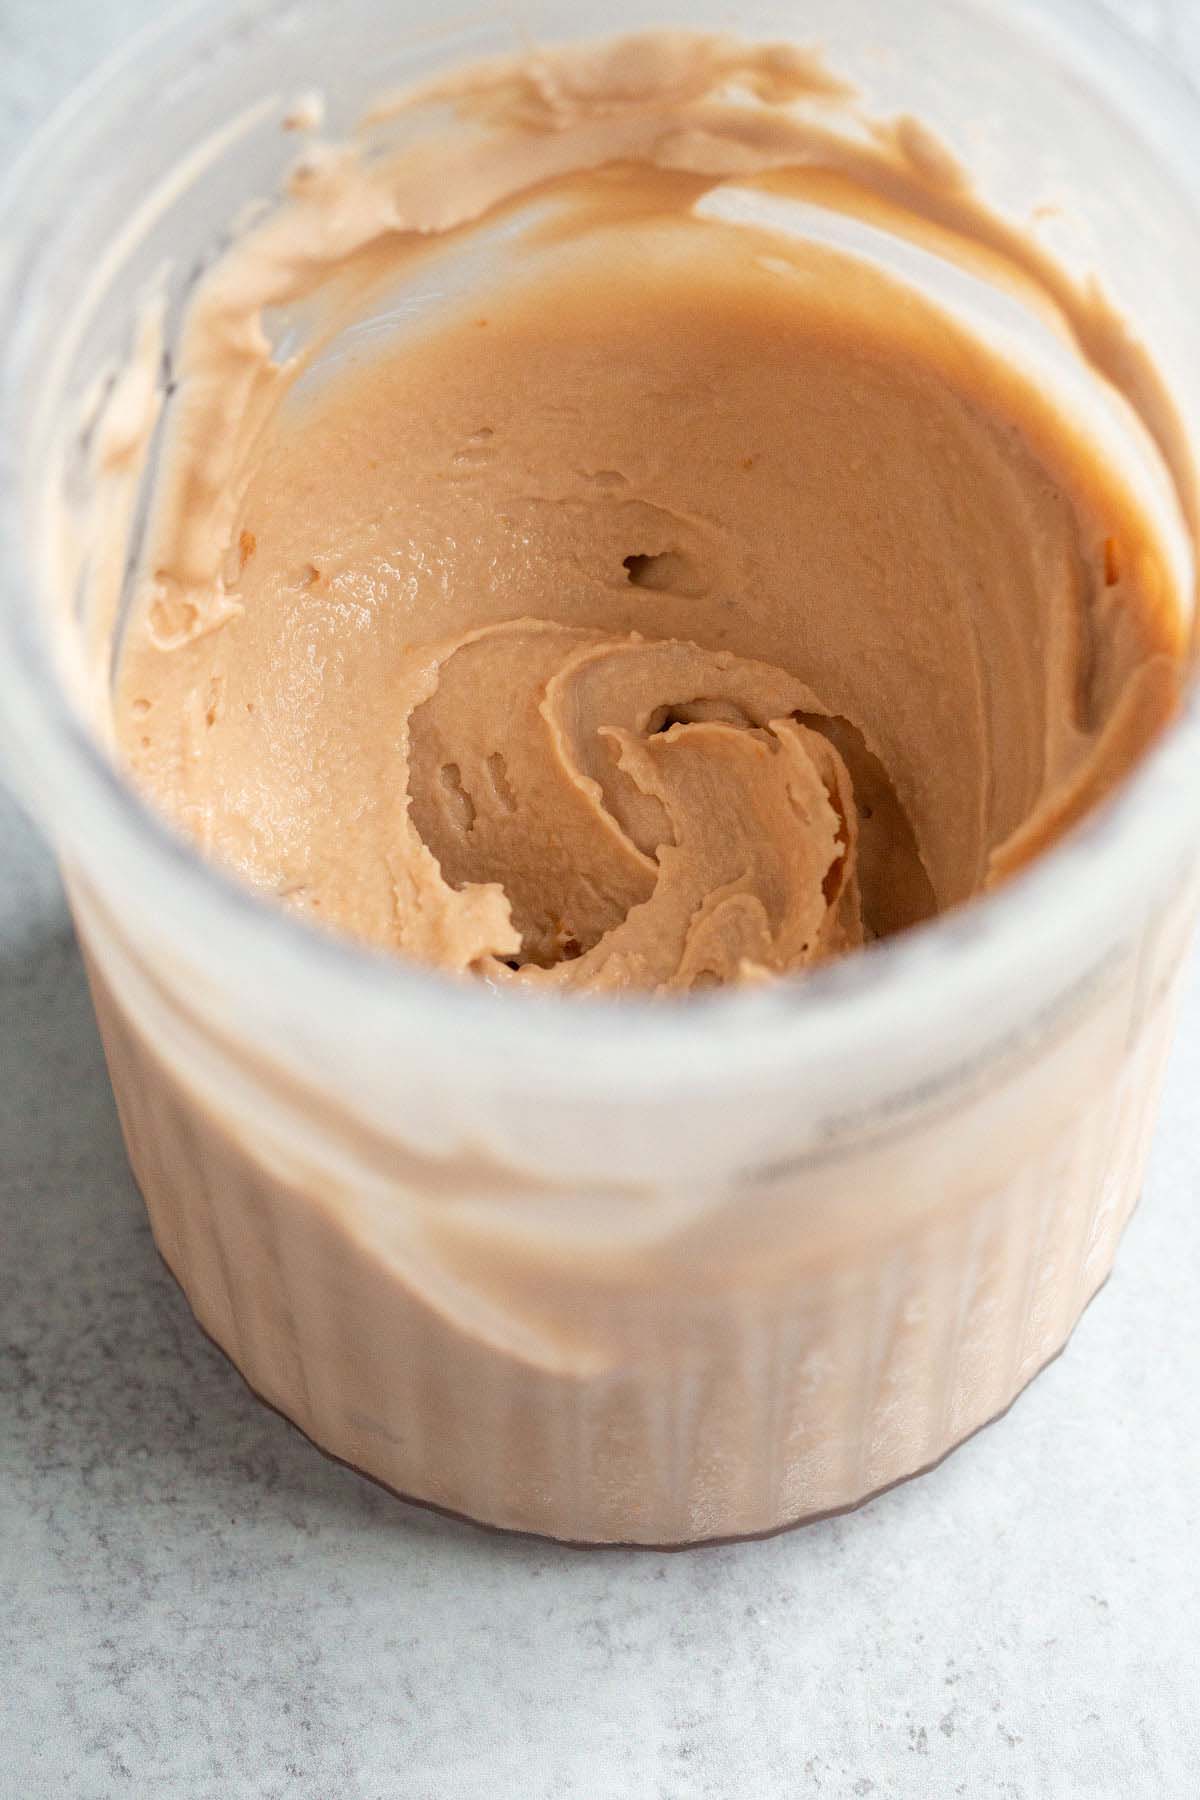 Chocolate peanut butter creami in Creami container